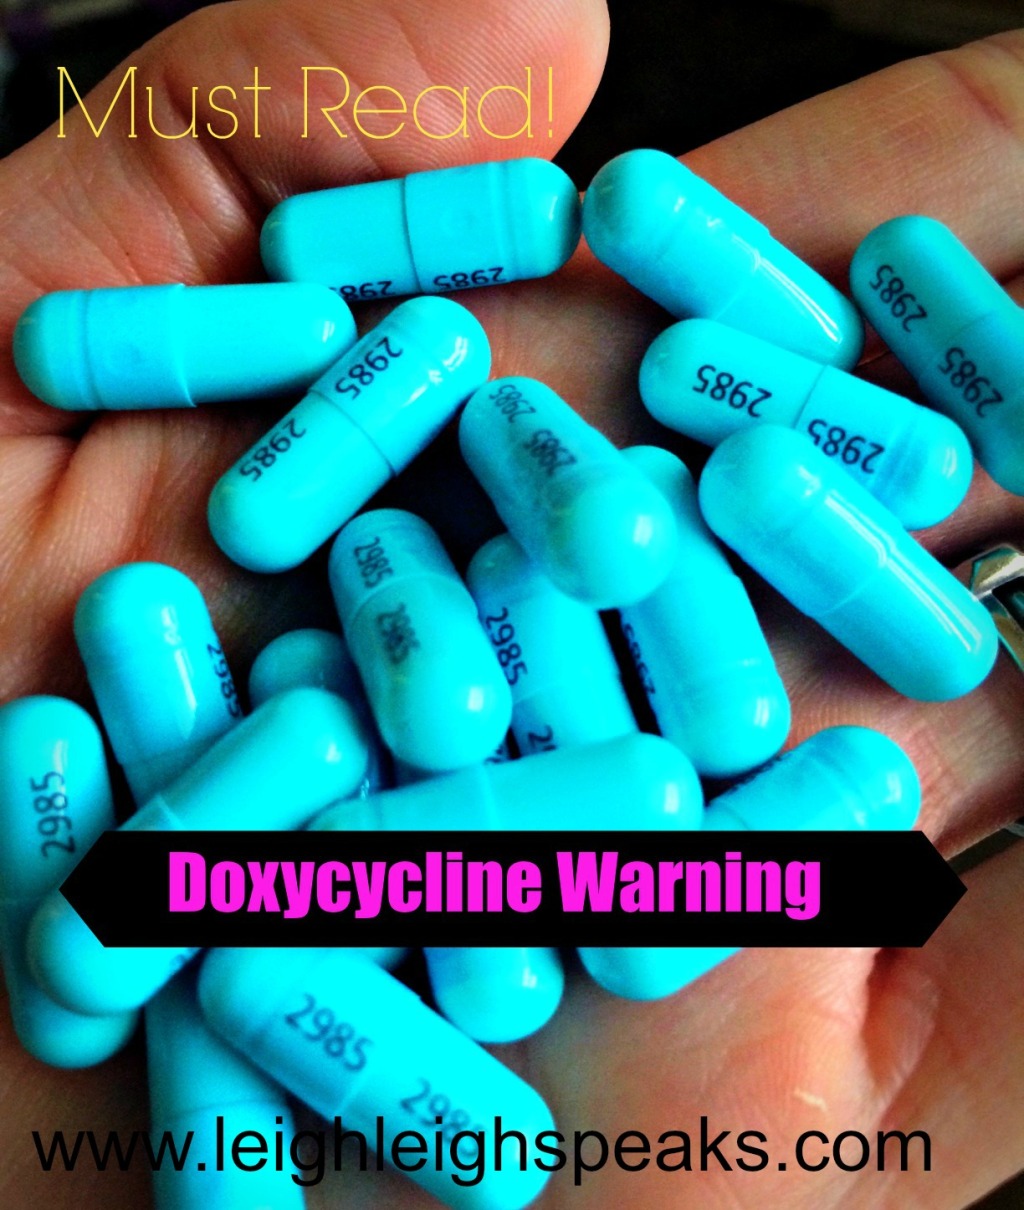 Doxycycline Hyclate…a must read if you are on this medication